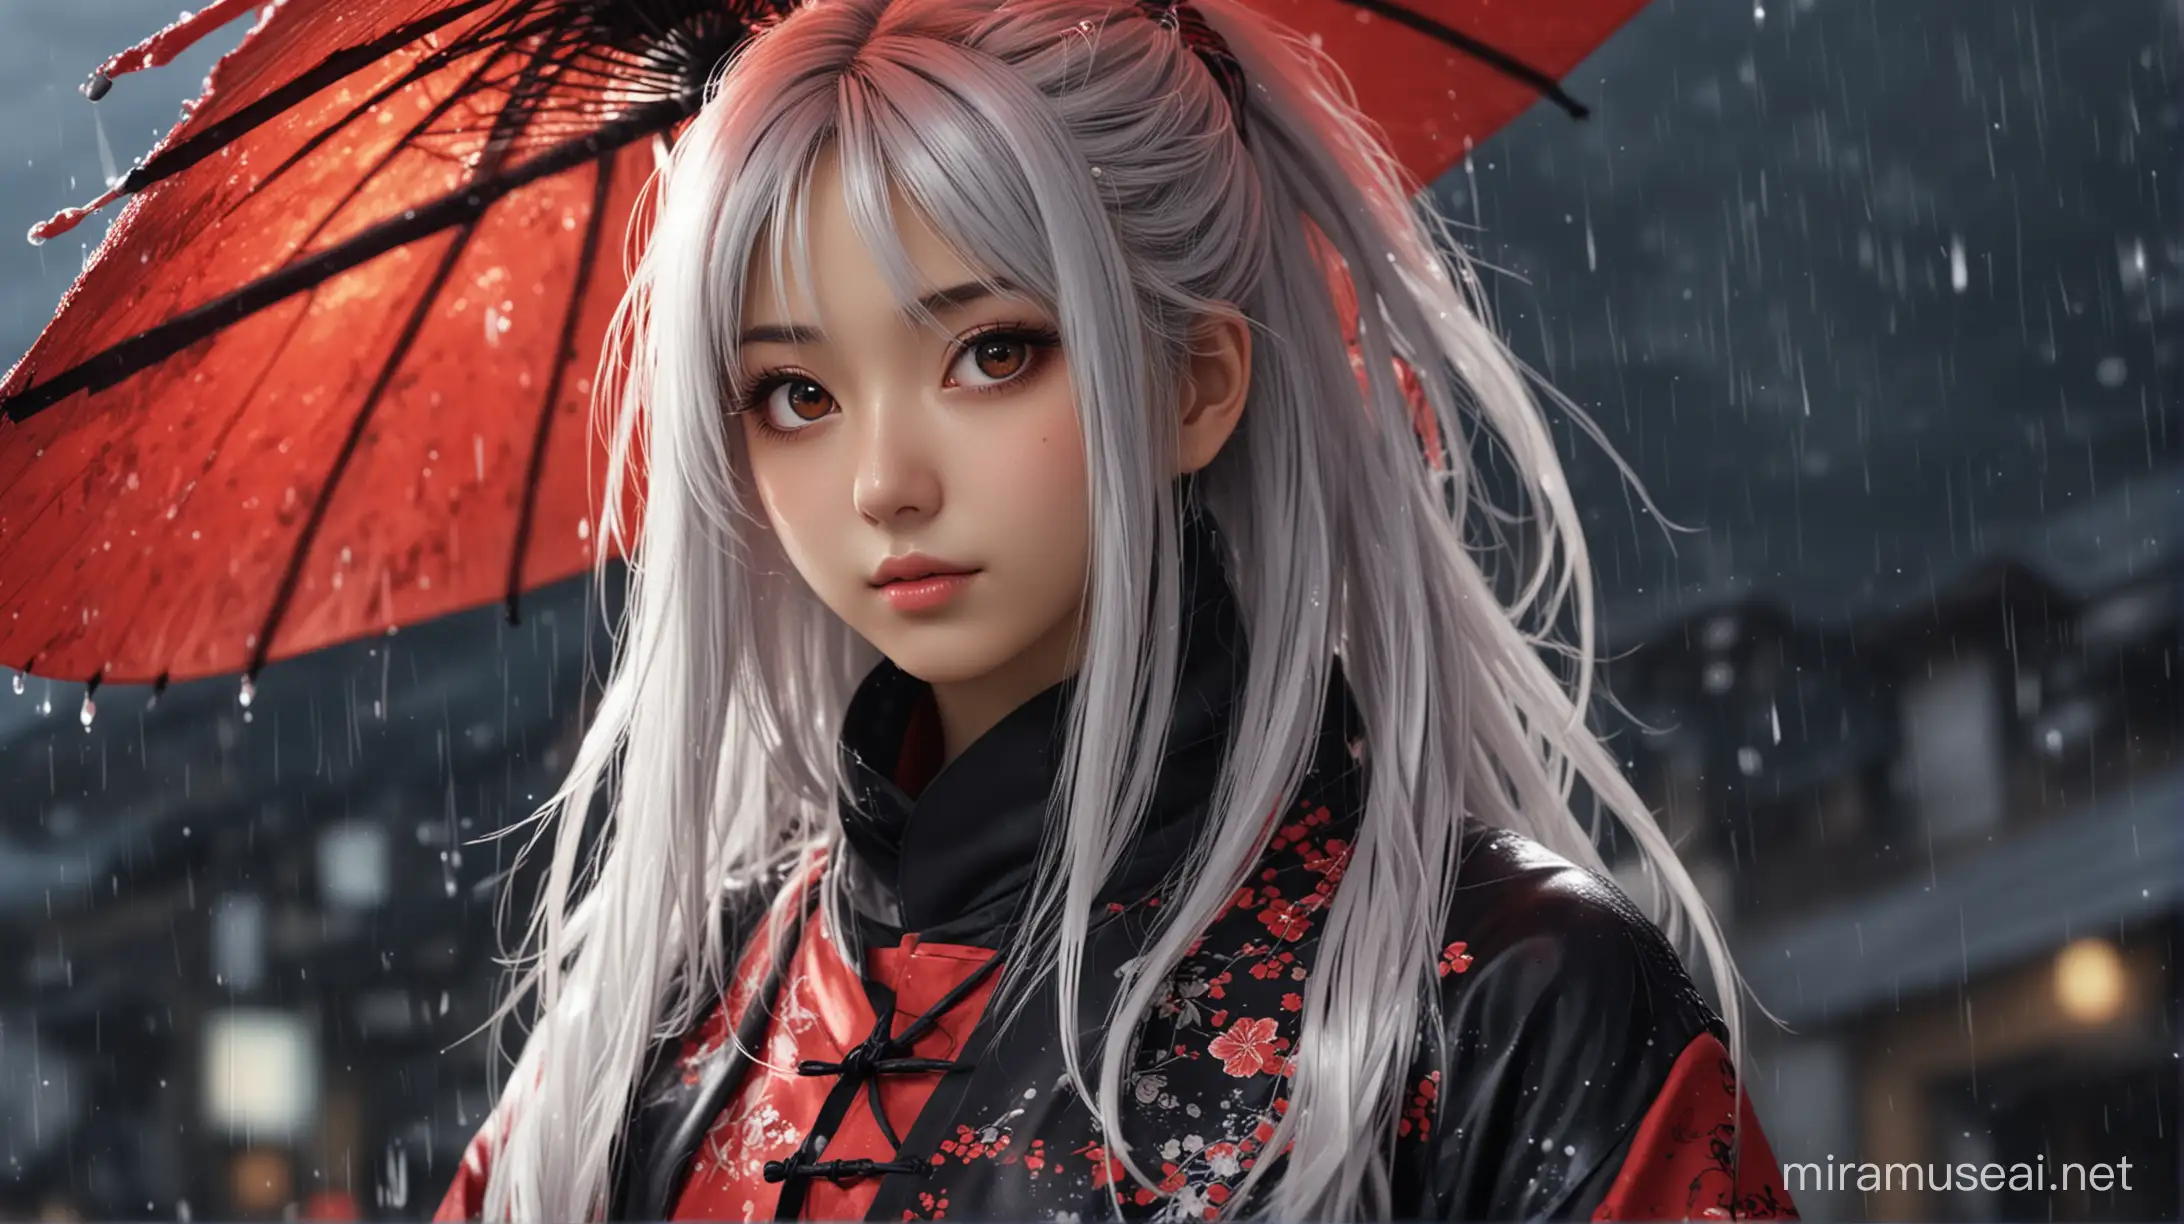 Elegant Anime Girl with Silver Hair in ChineseJapanese Attire Amidst Rainy Ambiance